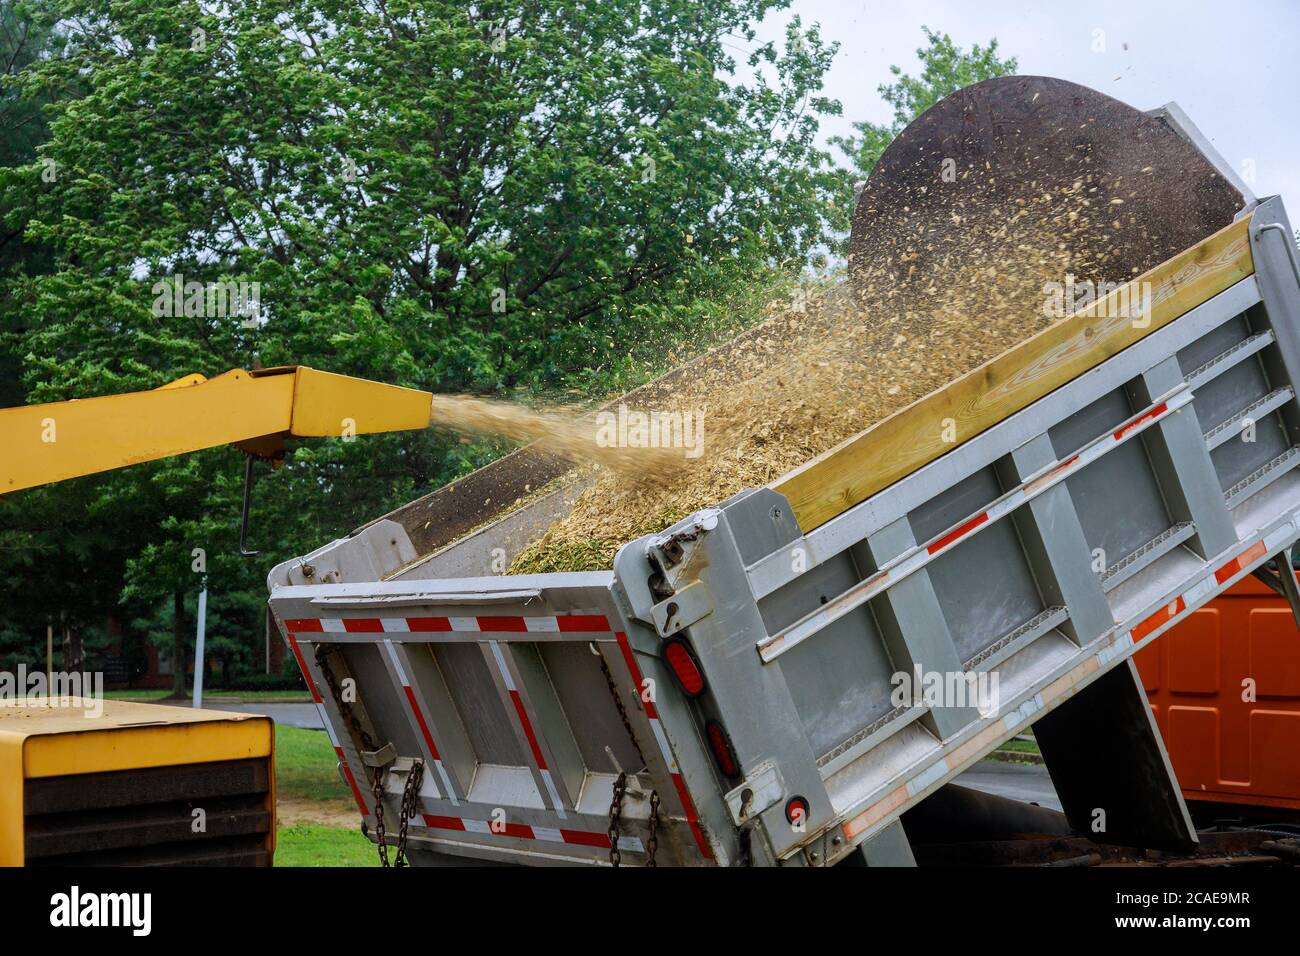 A wood chipper at work machinery, wood shredder placed in the intake chute for chipping after an unexpected hurricane storm Stock Photo